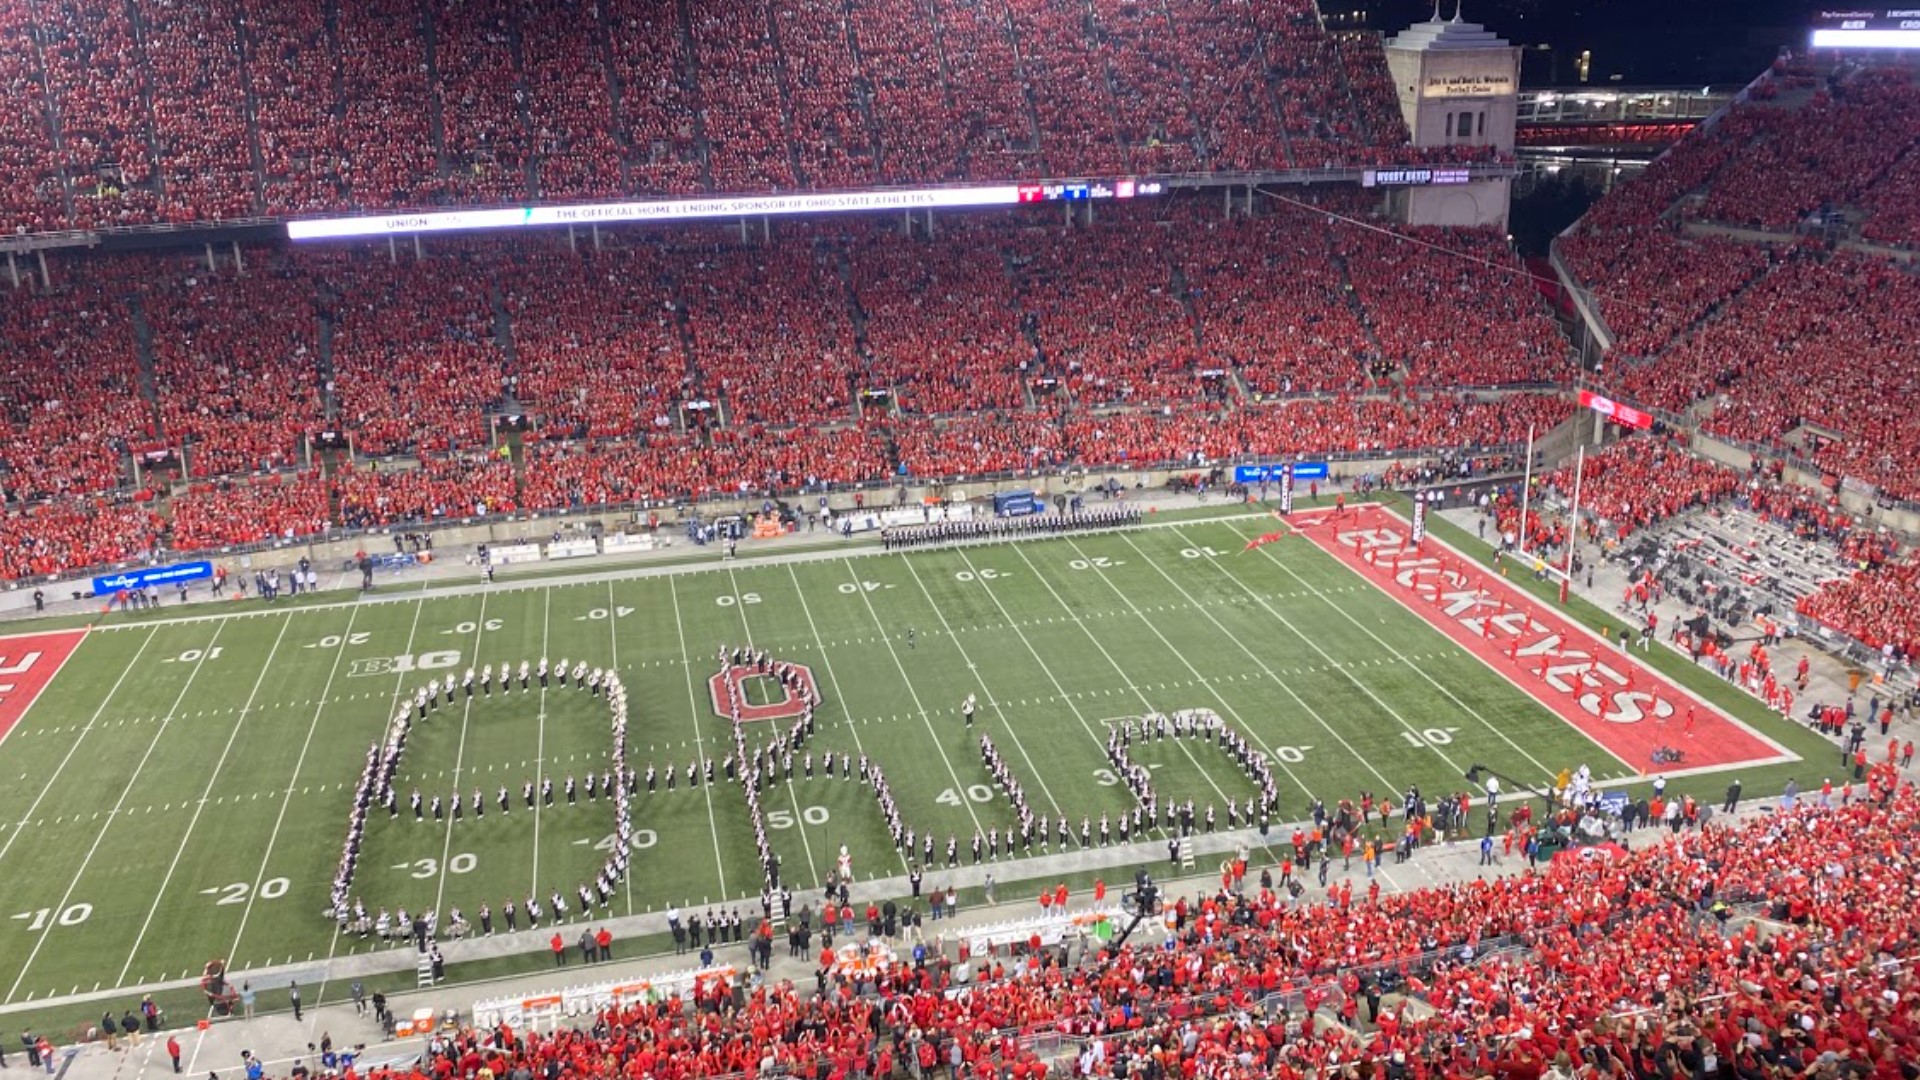 The Best Damn Band In The Land performs "Script Ohio" ahead of Ohio State's matchup against Penn State.